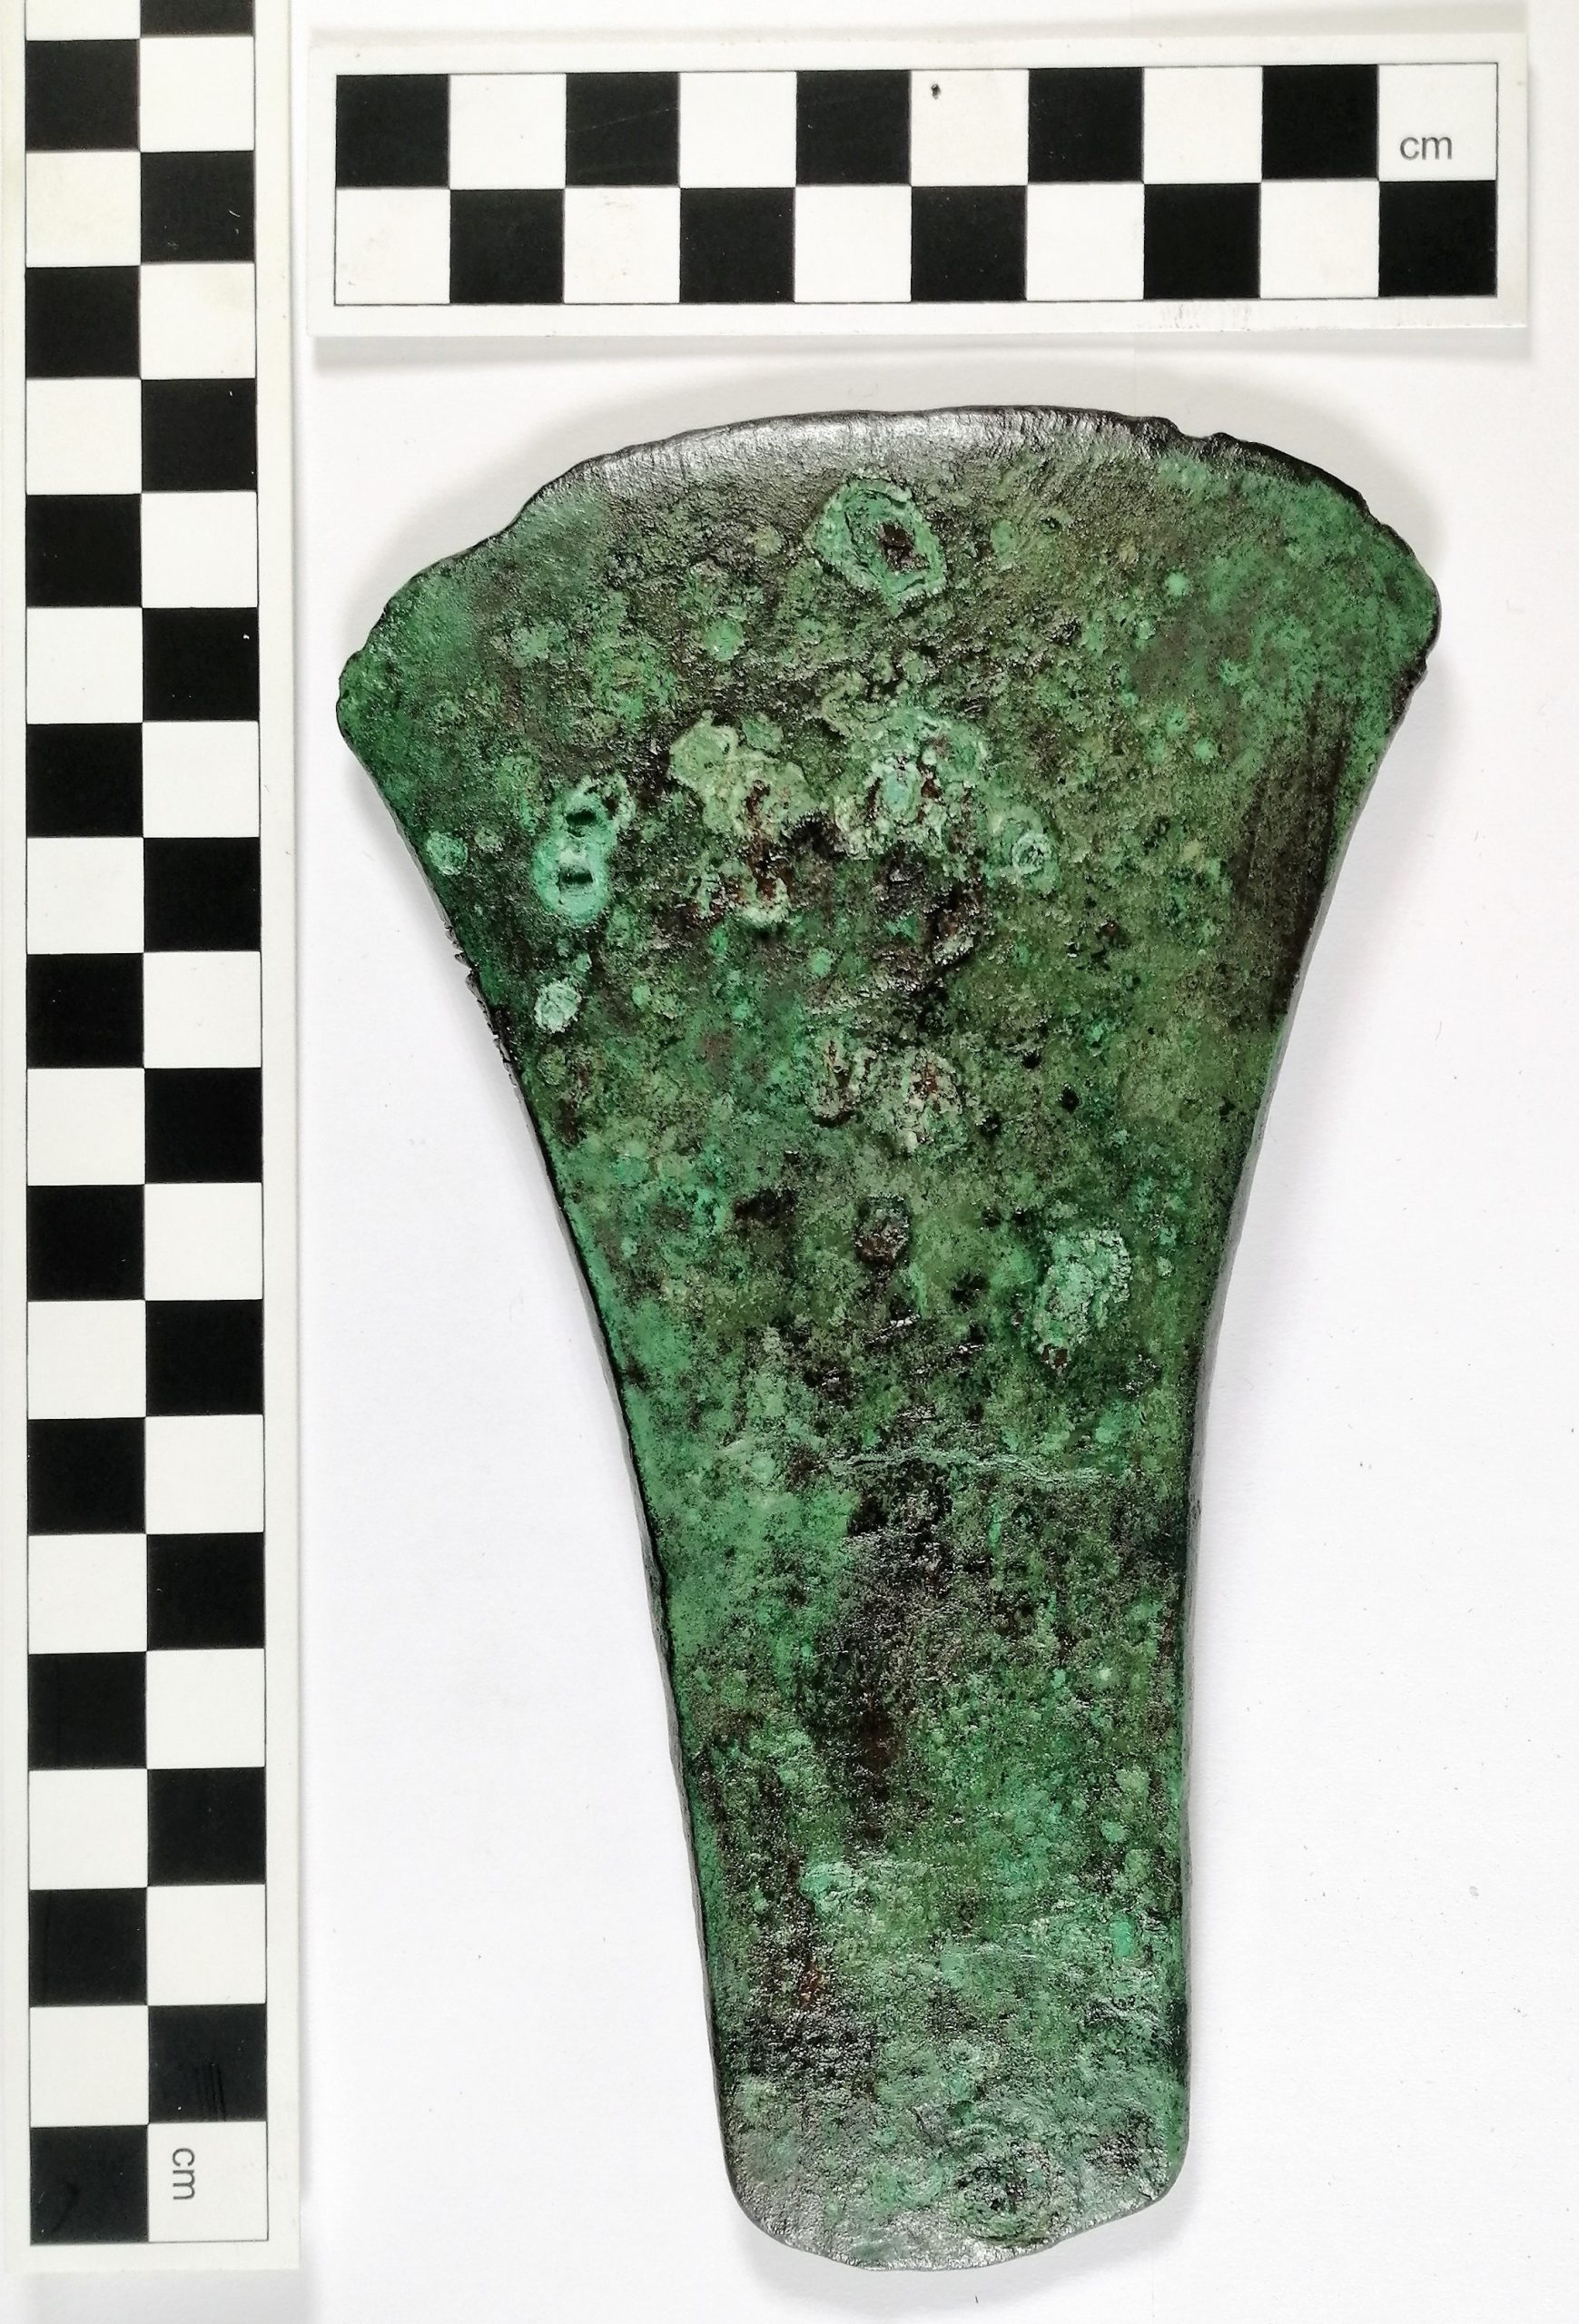 Bronze age axe head after treatment, showing lacquer coating.